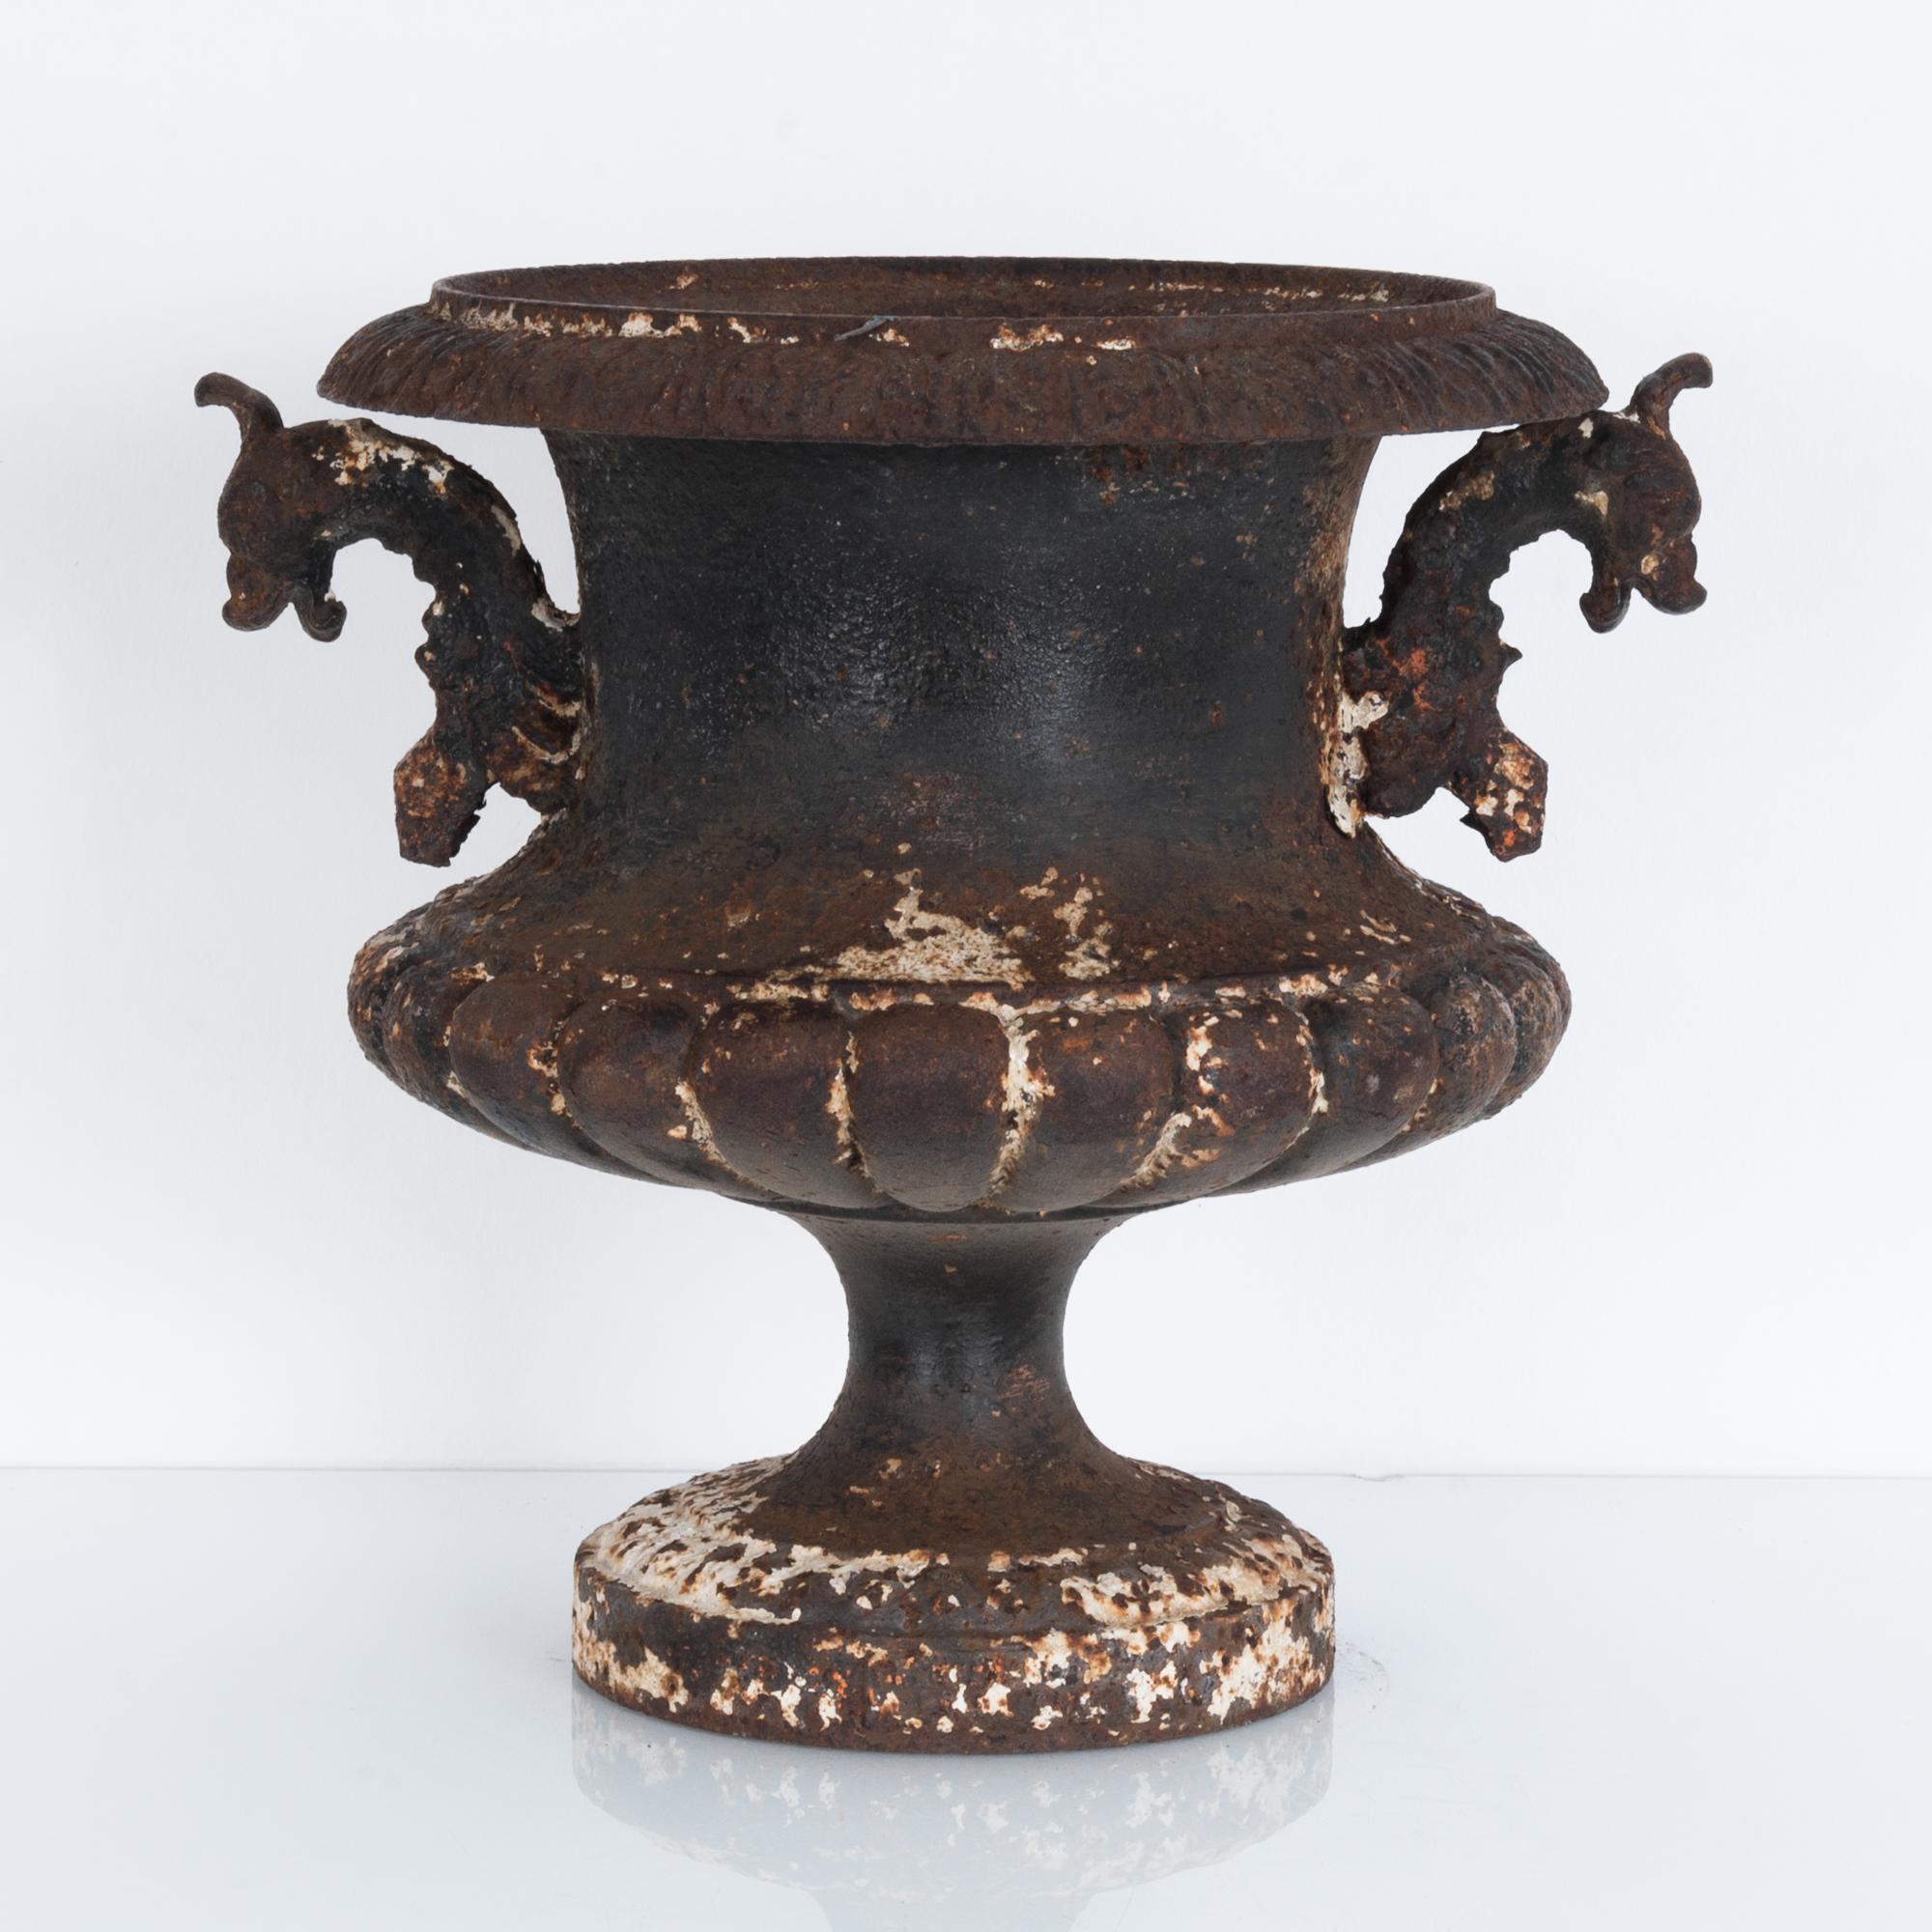 This freestanding antique planter from France, circa 1880, is made of dark cast iron with a unique oxidized patina. A pair of elaborate handles, moulded in the shape of animal heads, emerge from a tulip shaped urn with a scalloped base. A delightful